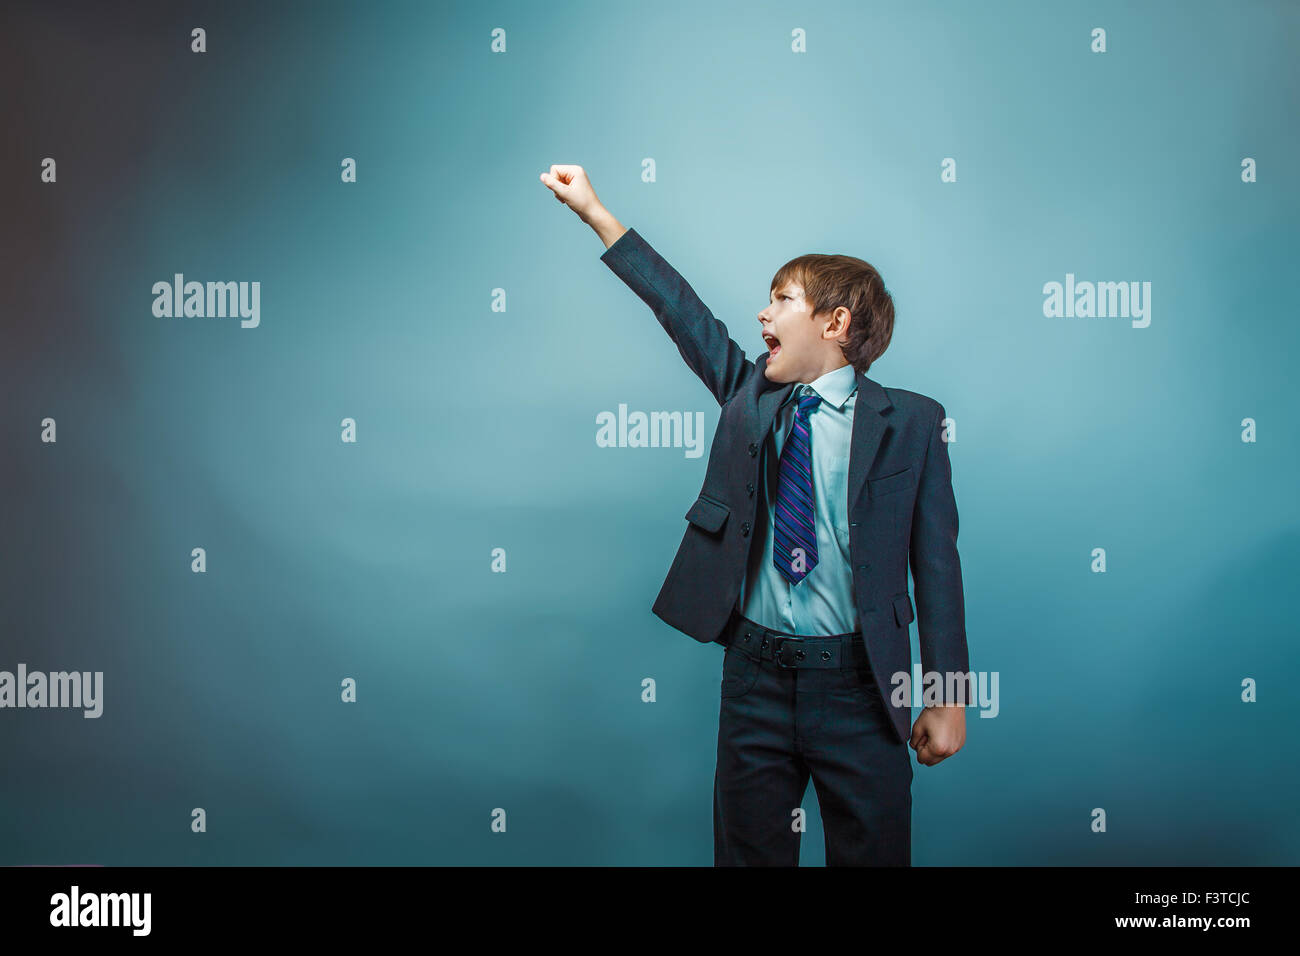 European appearance teenager boy in a business suit raised his h Stock Photo